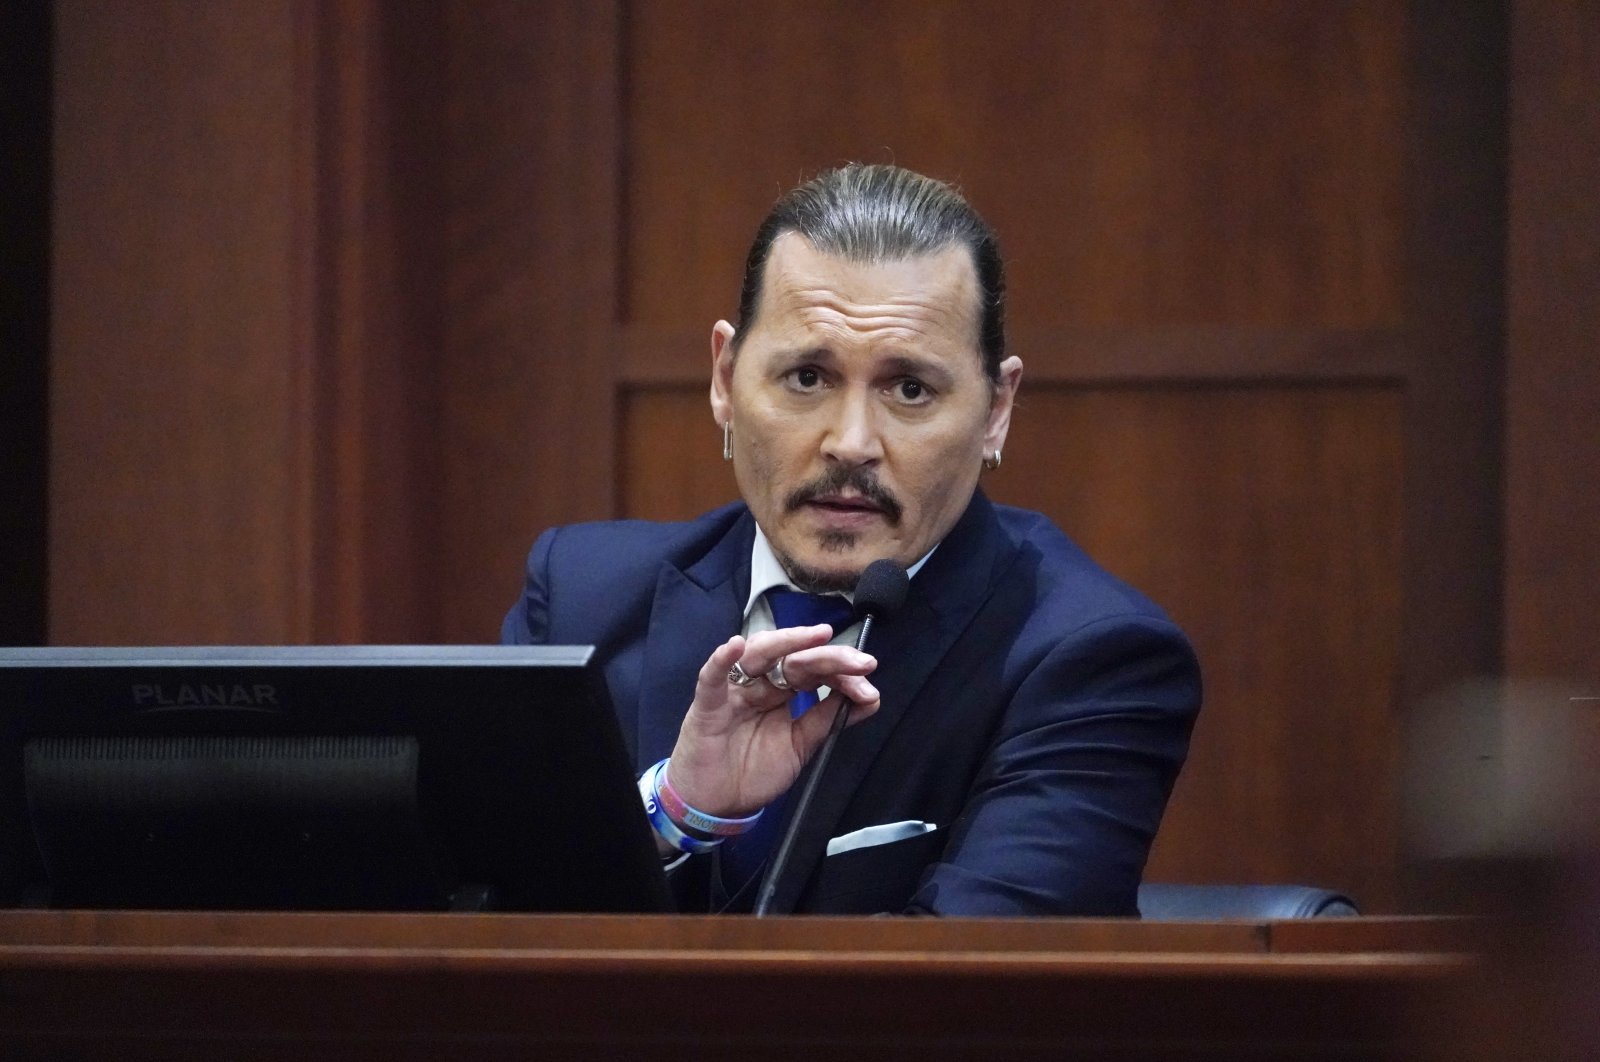 U.S. actor Johnny Depp testifies in the courtroom at the Fairfax County Circuit Courthouse in Fairfax, Virginia, U.S., April 25, 2022. (EPA)